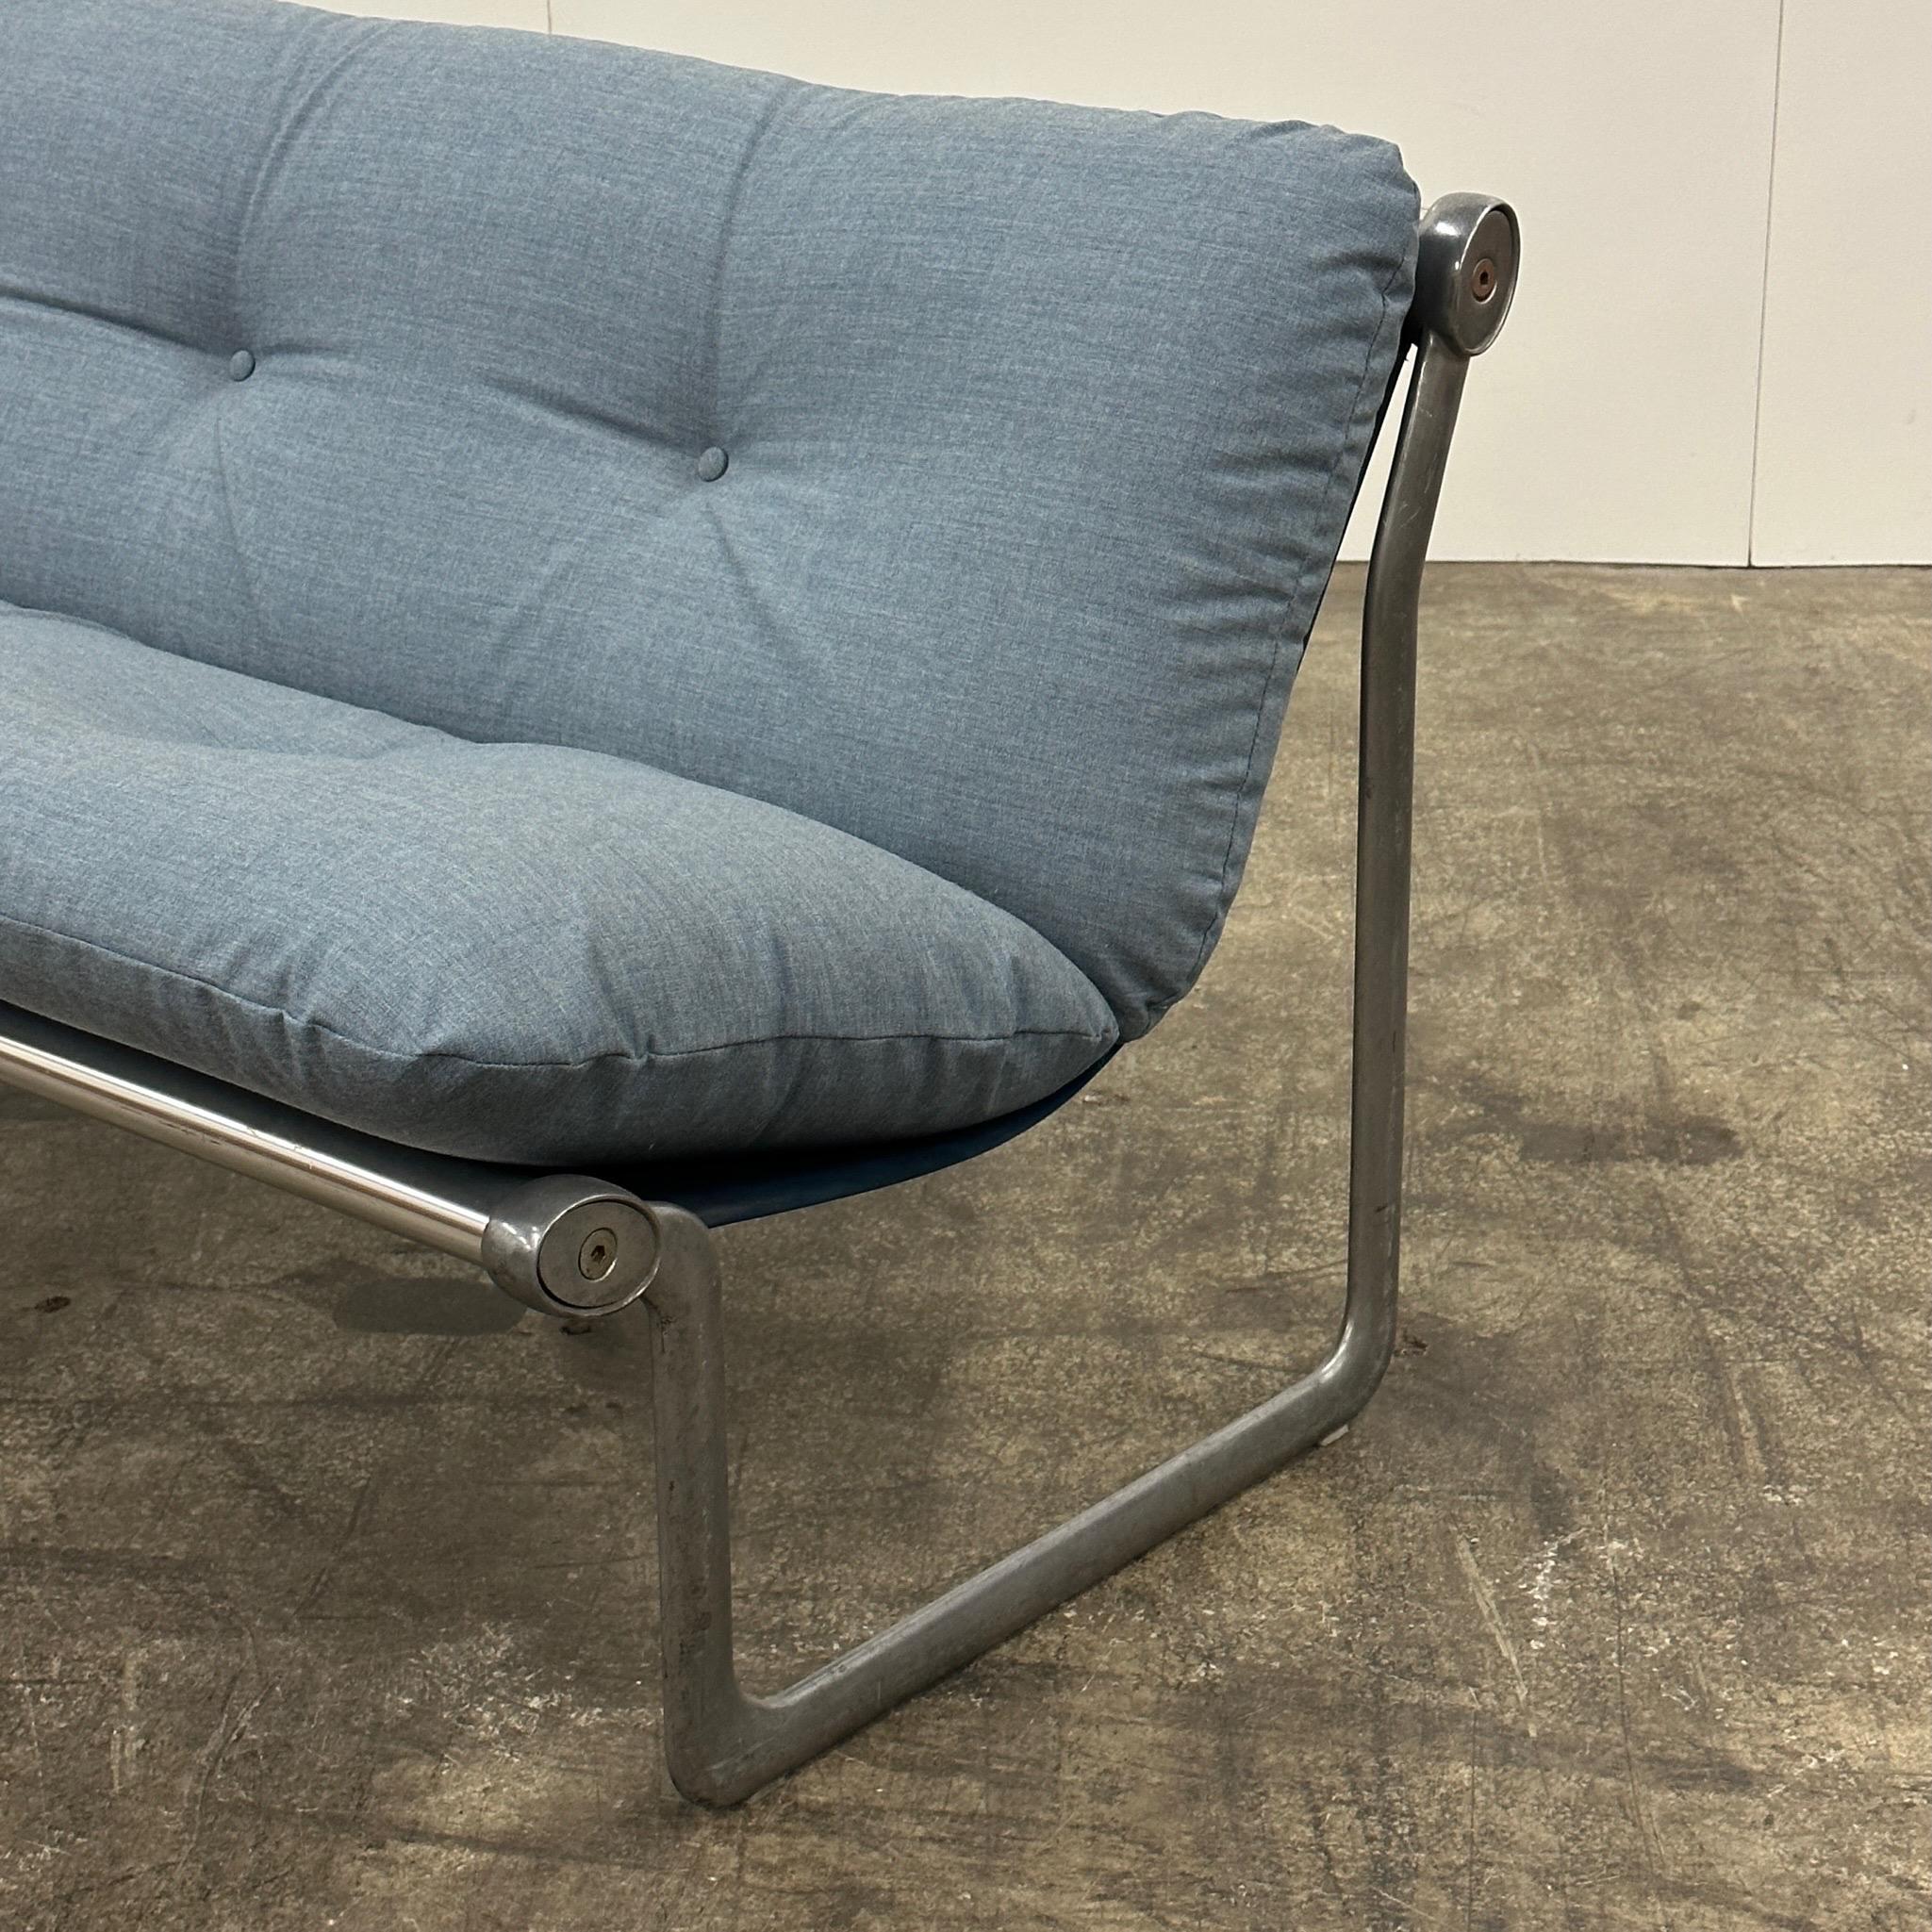 American Sling Sofa by Bruce Hannah and Andrew Morrison for Knoll